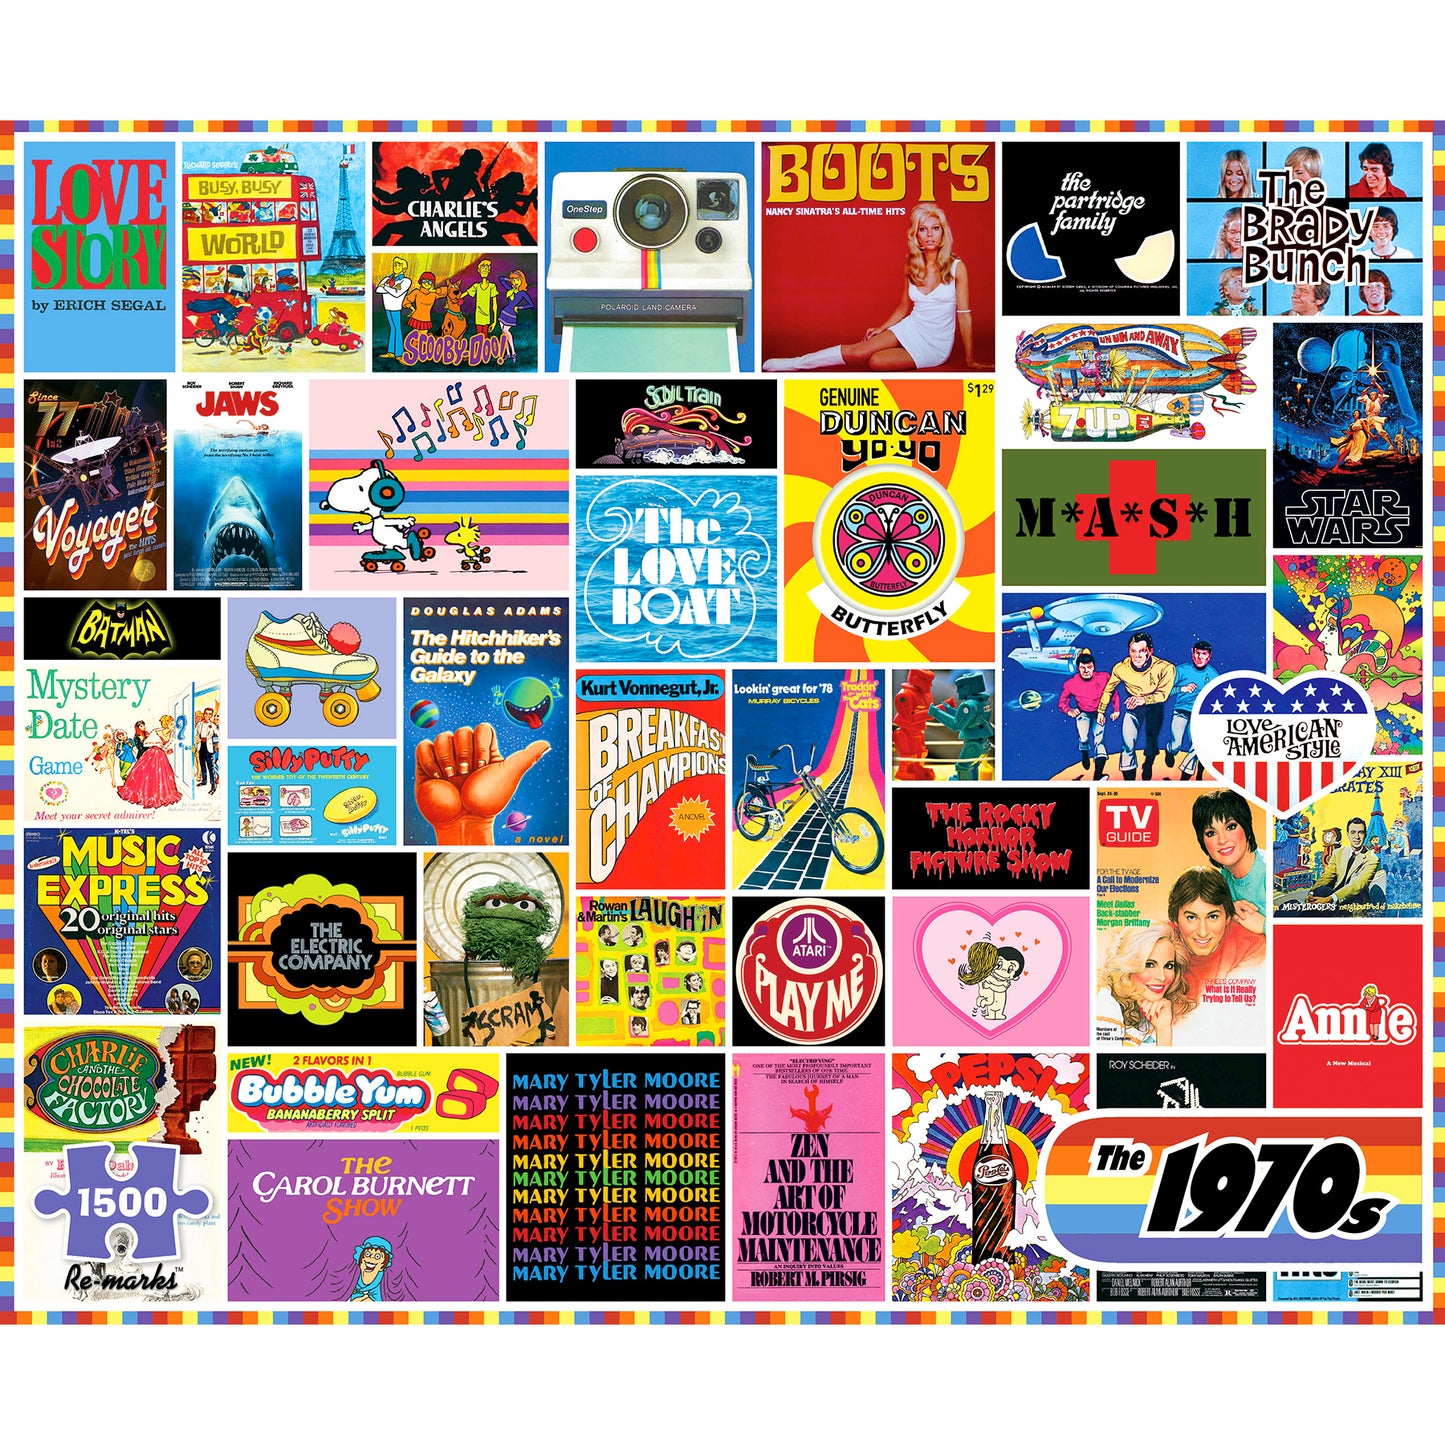 1970s Collage 1500-Piece Jigsaw Puzzle